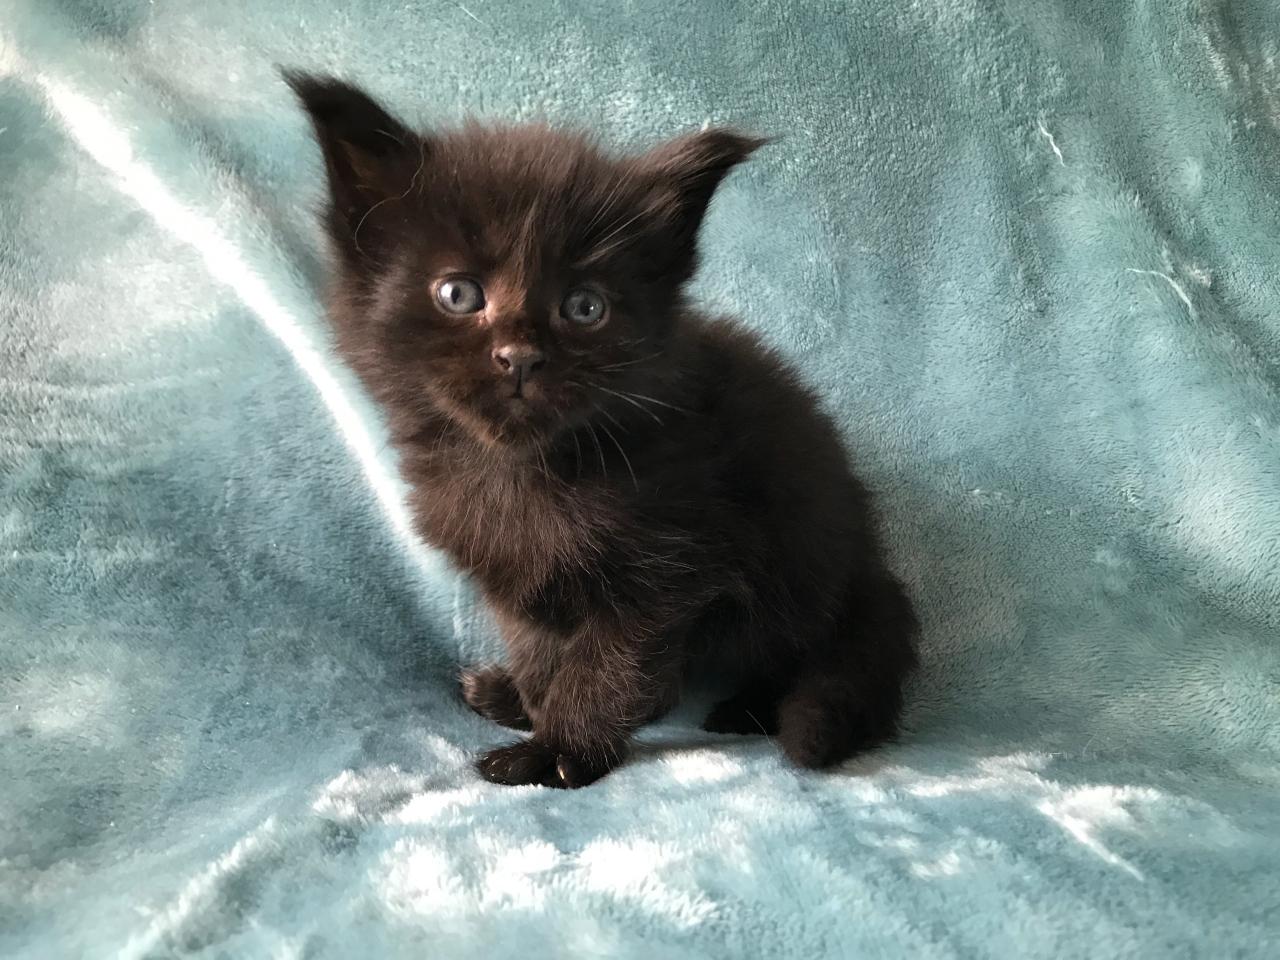 Real maine coon kittens for sale